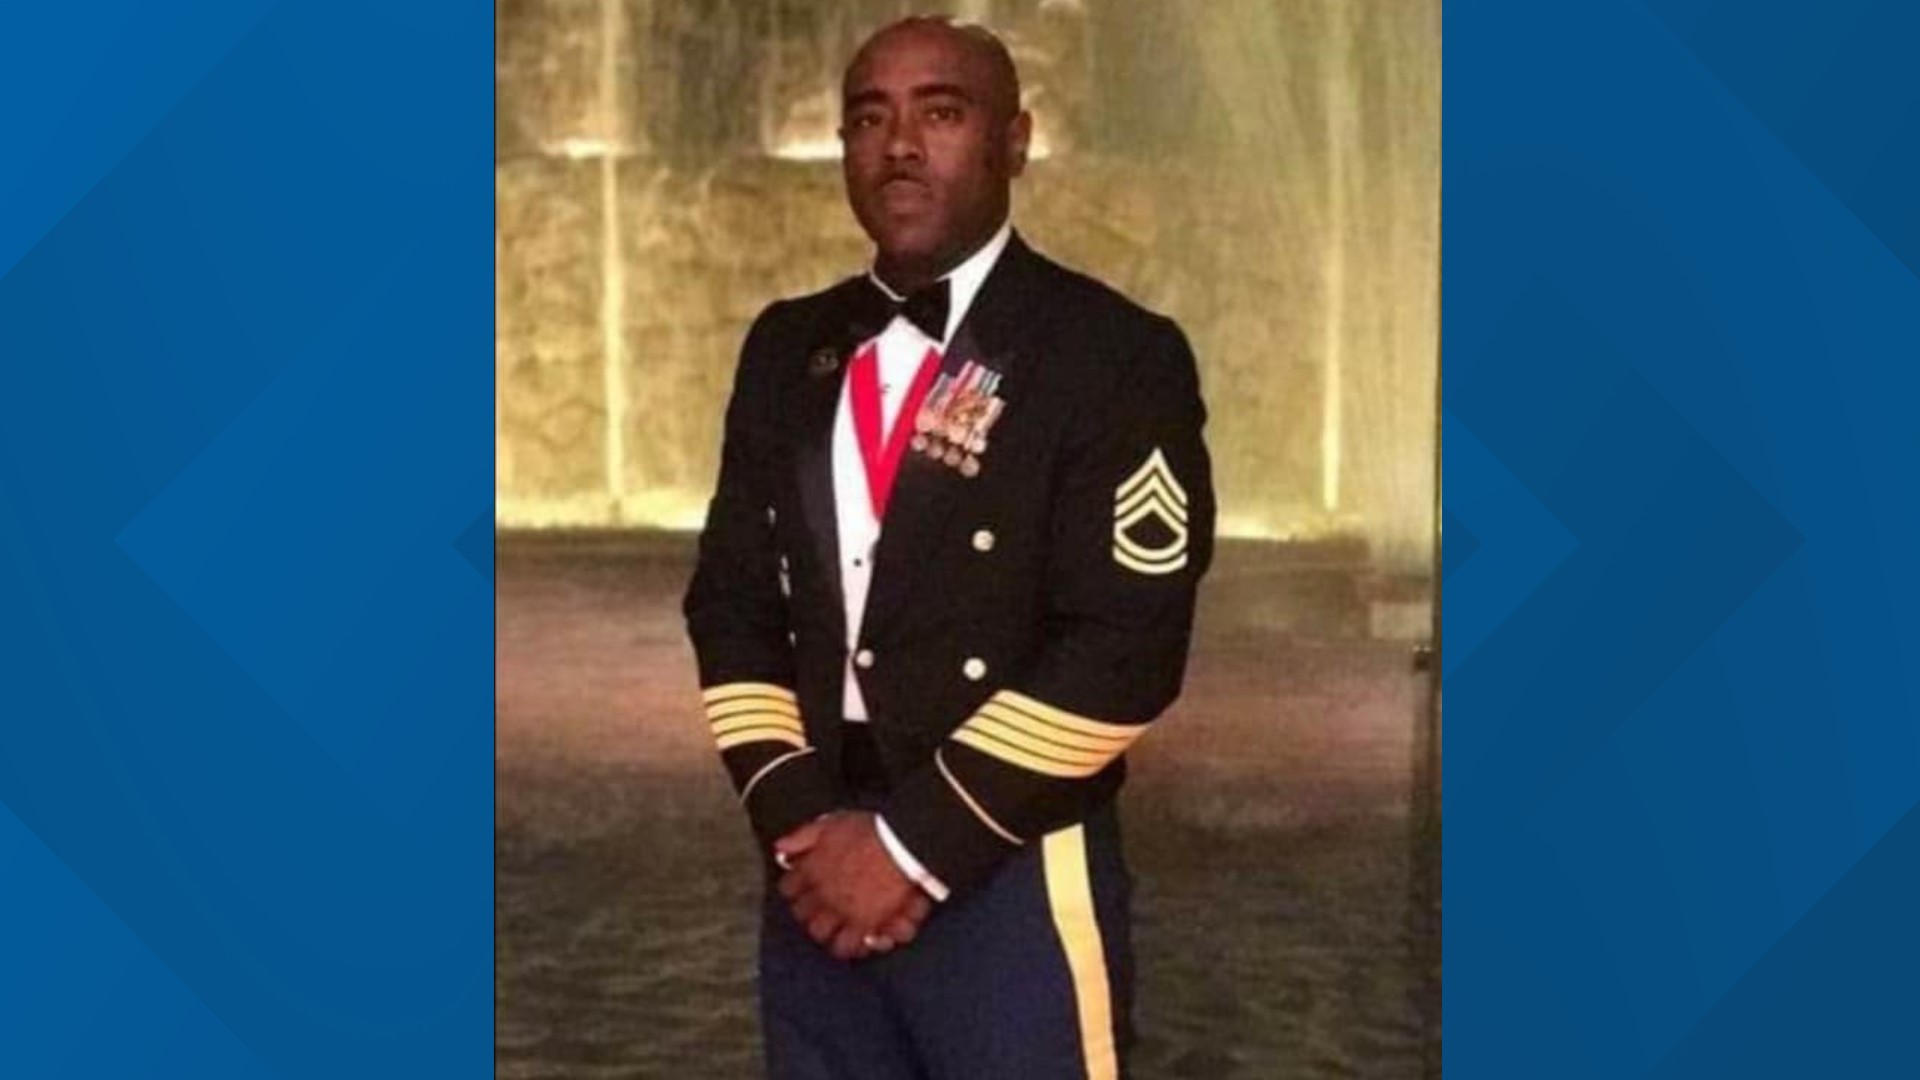 Sgt. 1st Class Raymond Haley served for 16 years before dying in a single vehicle accident on Feb. 20.